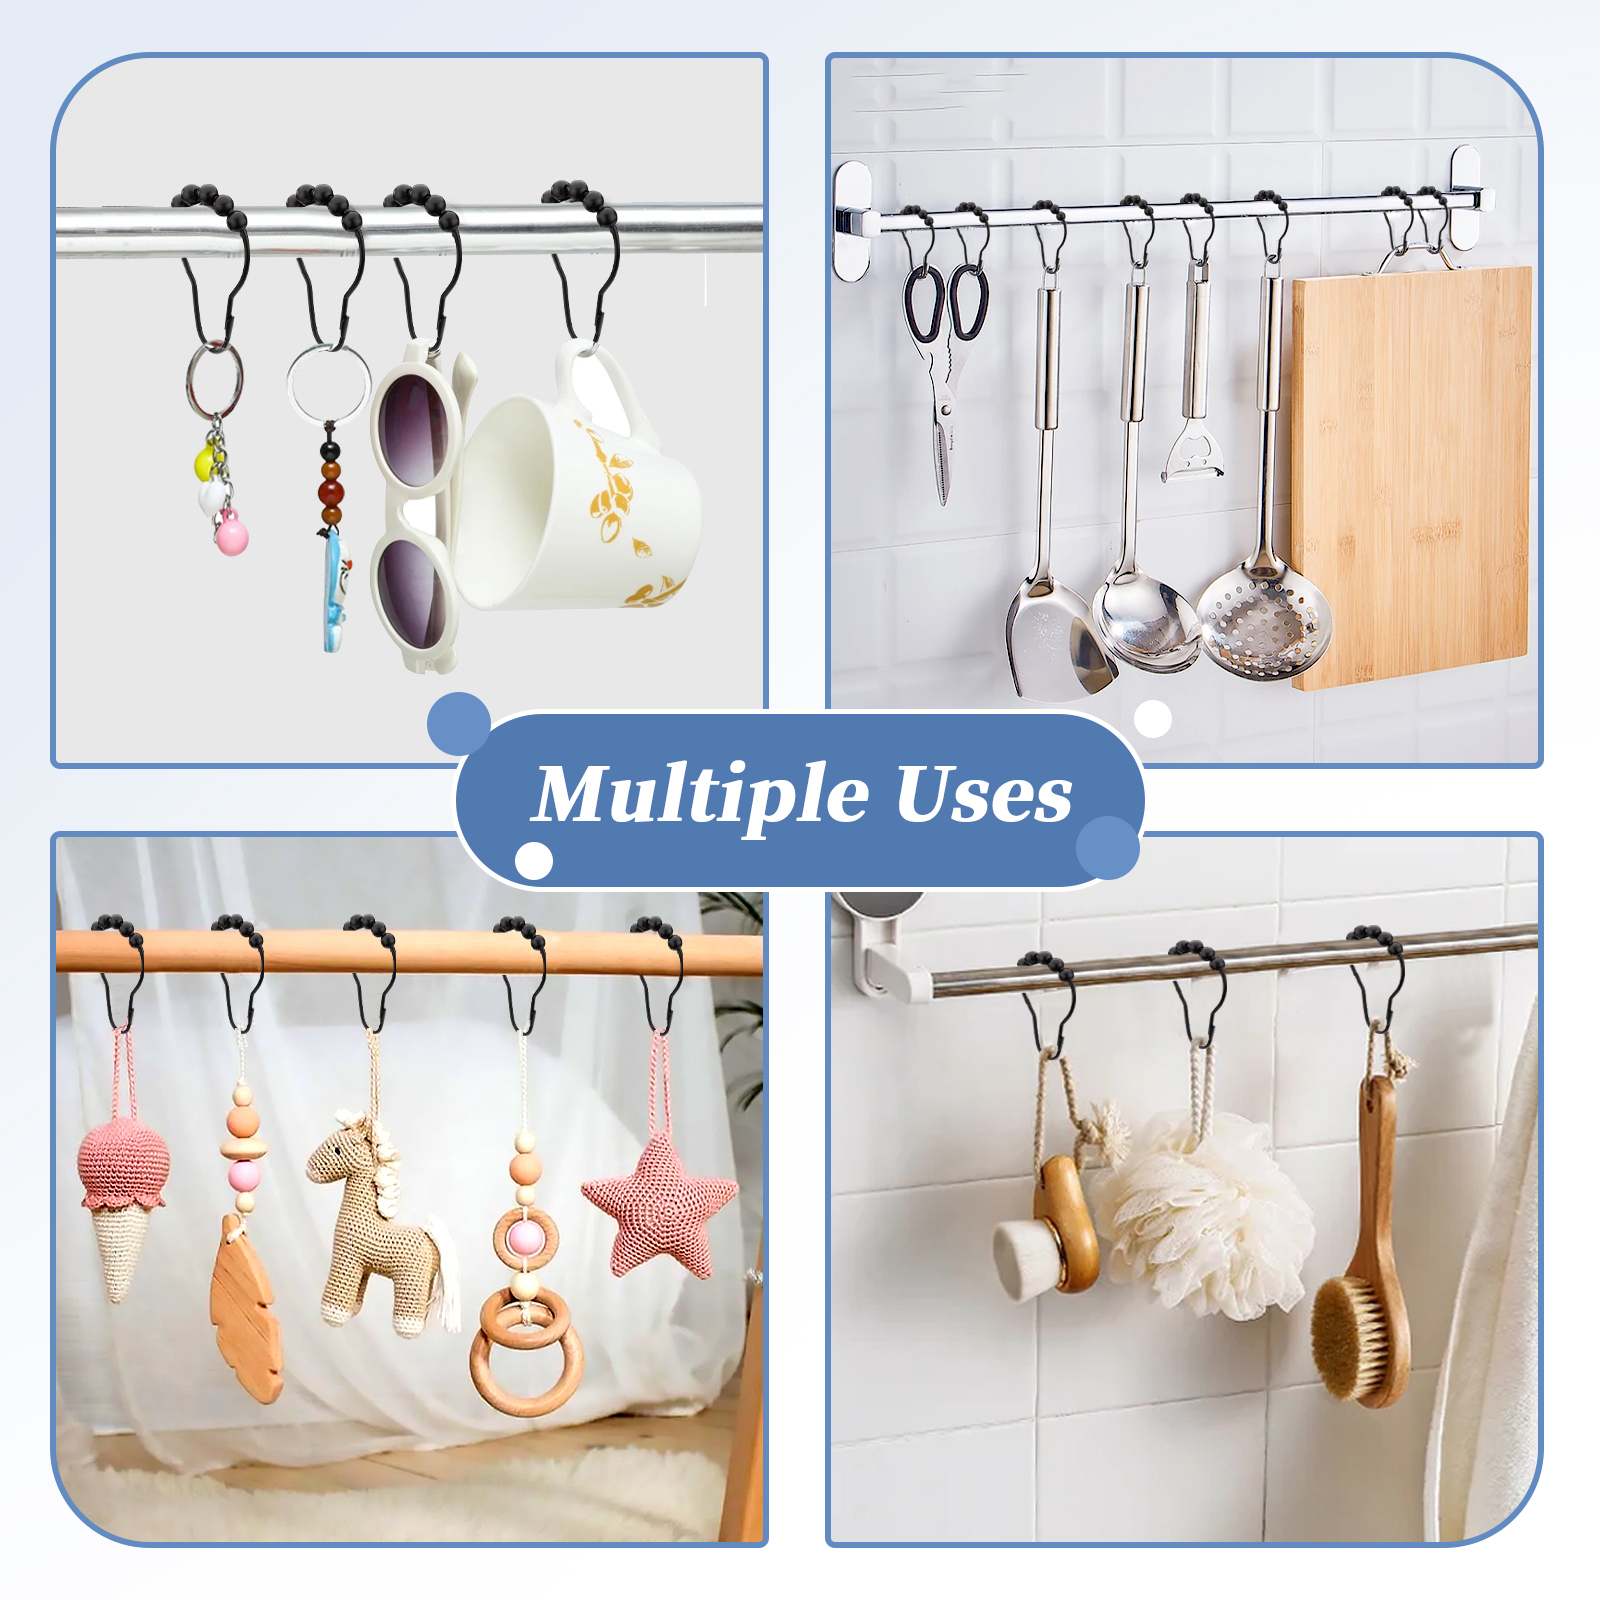 Shower Curtain Hooks Shower Curtain Rings Stainless Steel Black Shower Curtain Hooks Smooth Sliding for Curtain  